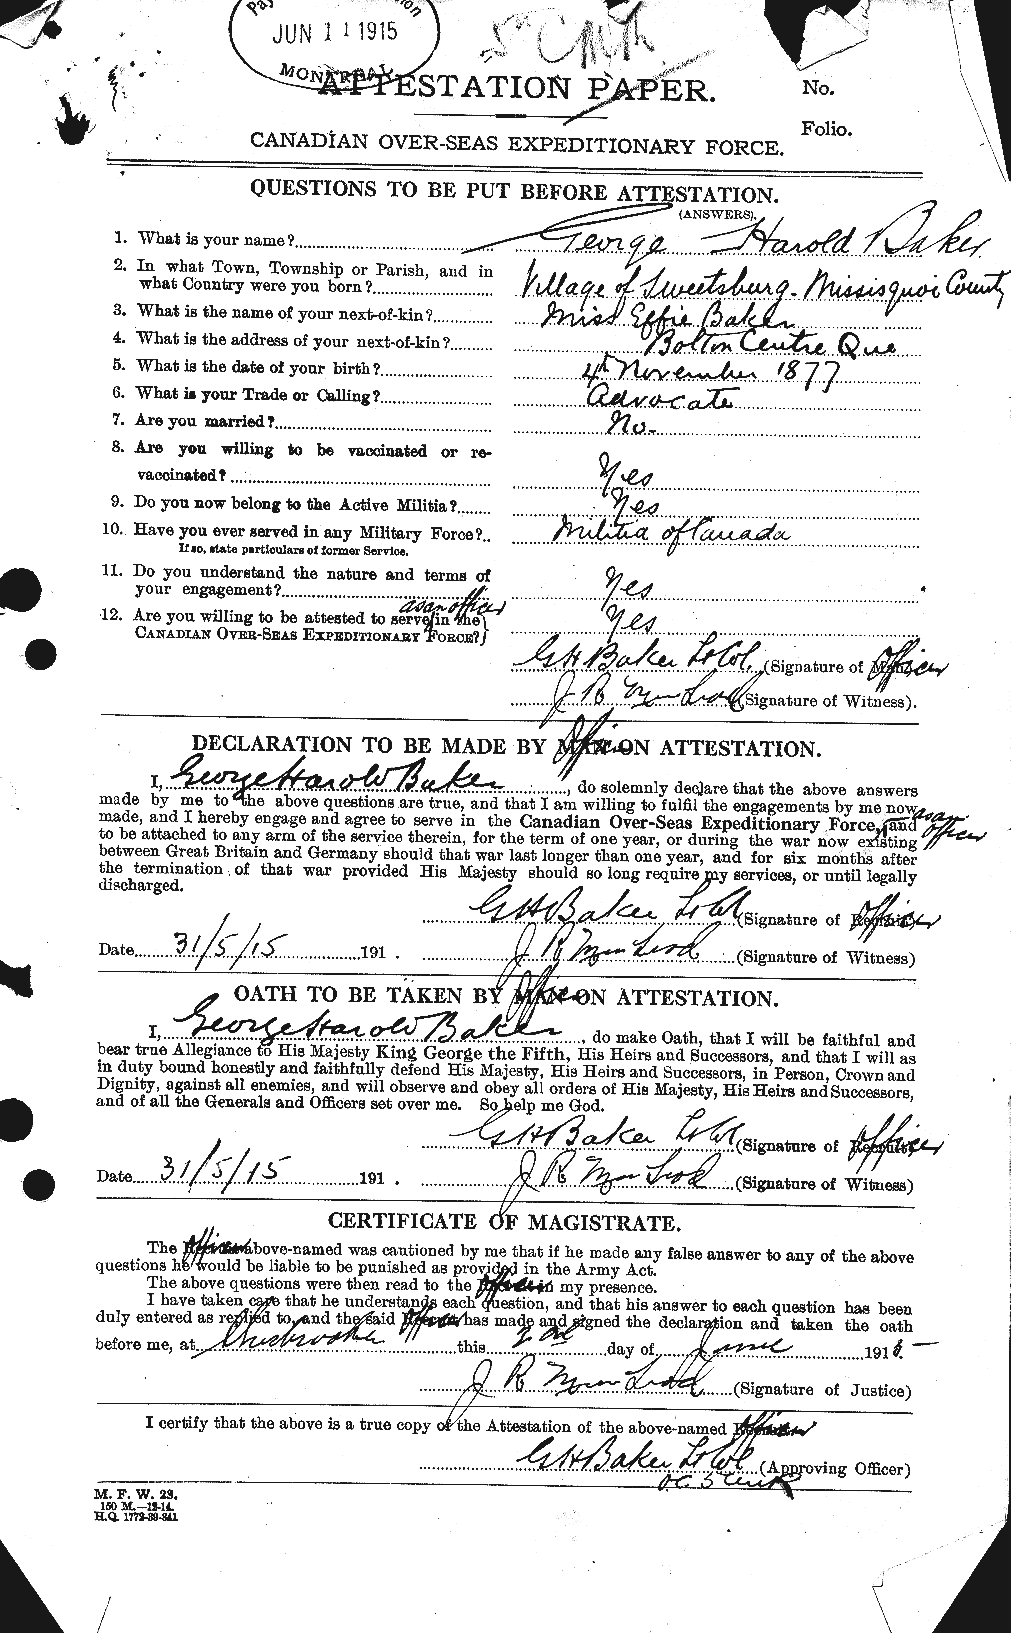 Personnel Records of the First World War - CEF 216235a